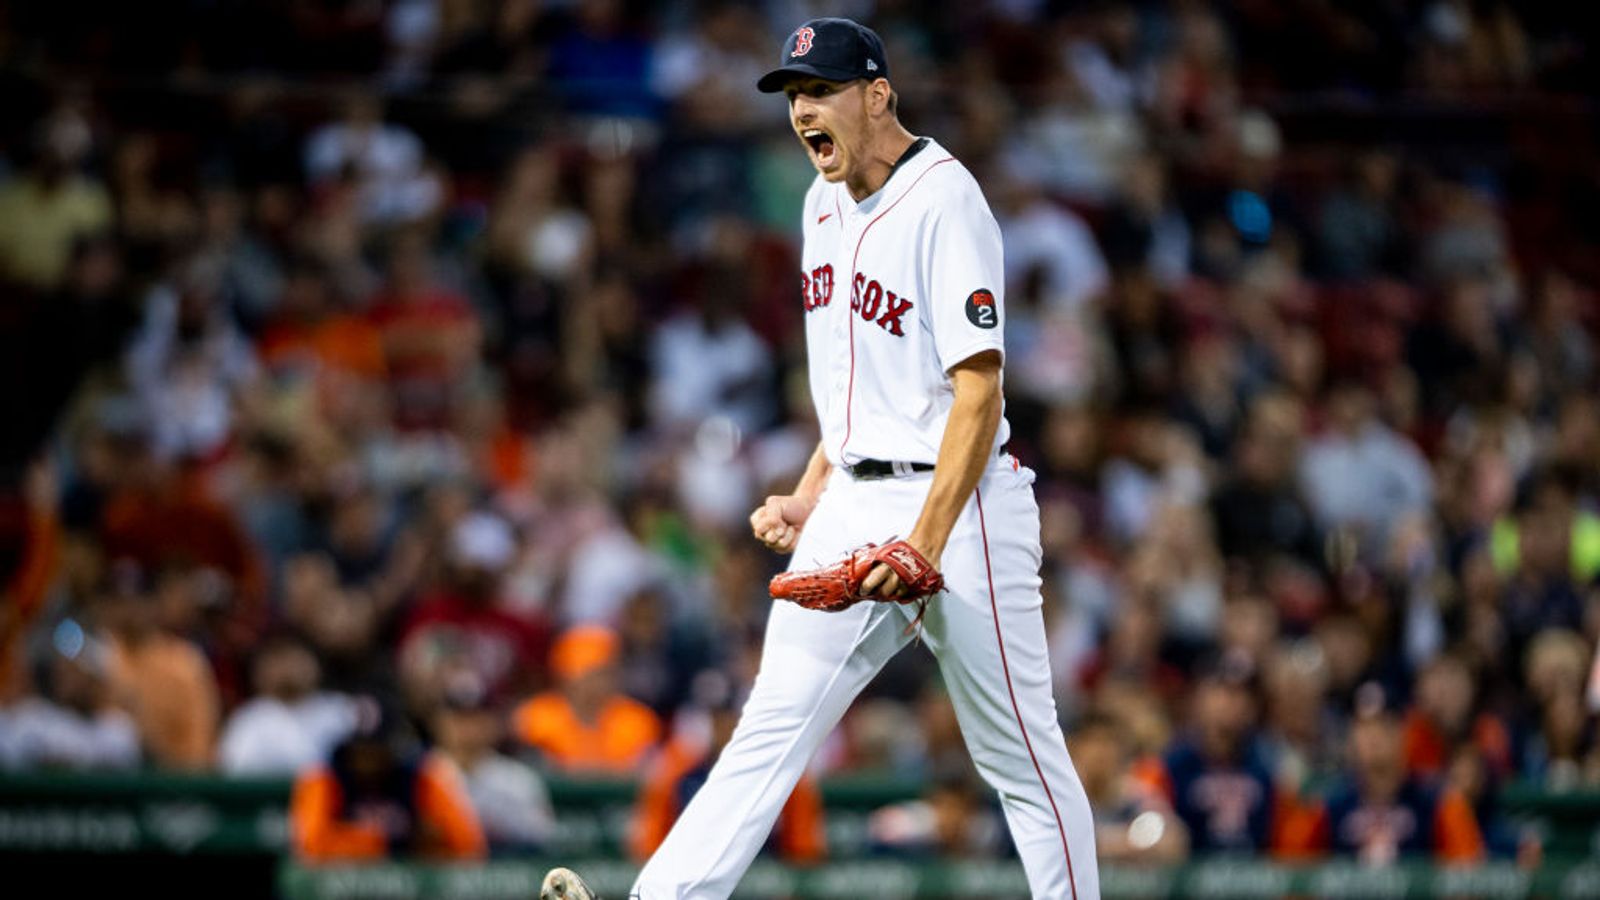 BSJ Game Report: Red Sox 5, Astros 1 - Pivetta dominant as Sox take series